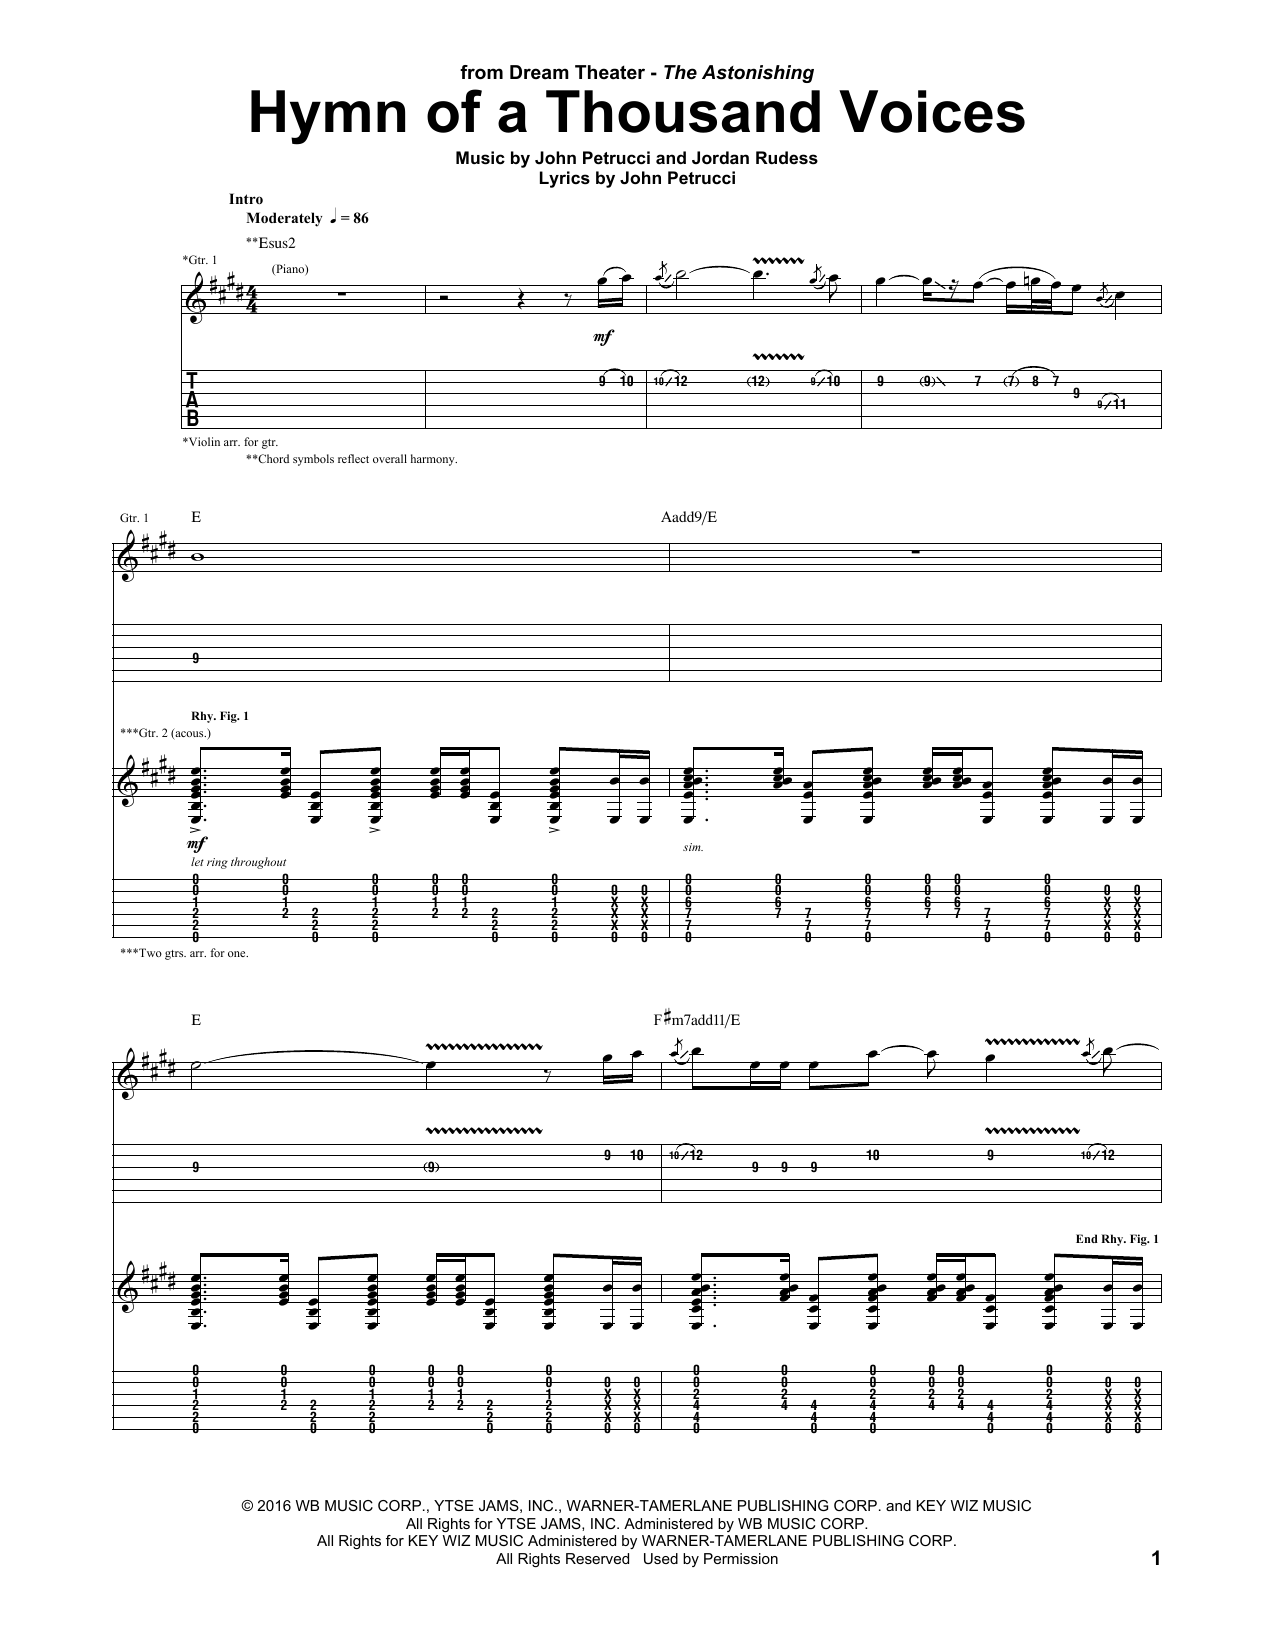 Dream Theater Hymn Of A Thousand Voices sheet music notes and chords. Download Printable PDF.